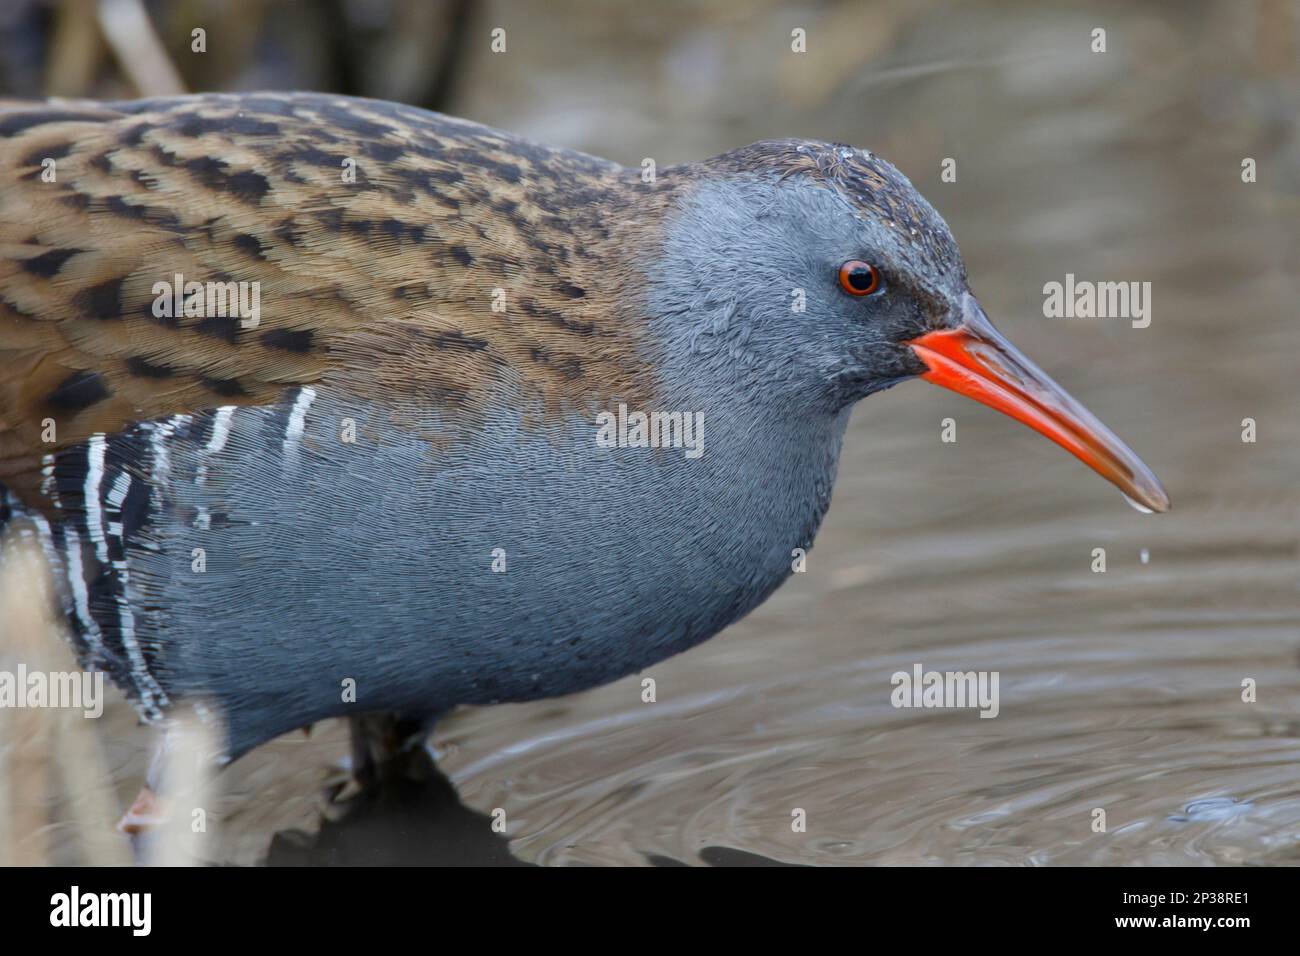 A Water Rail wild bird feeding on small seeds and food in the wetland reeds at RSPB Lakenheath Fen in Norfolk, England Stock Photo